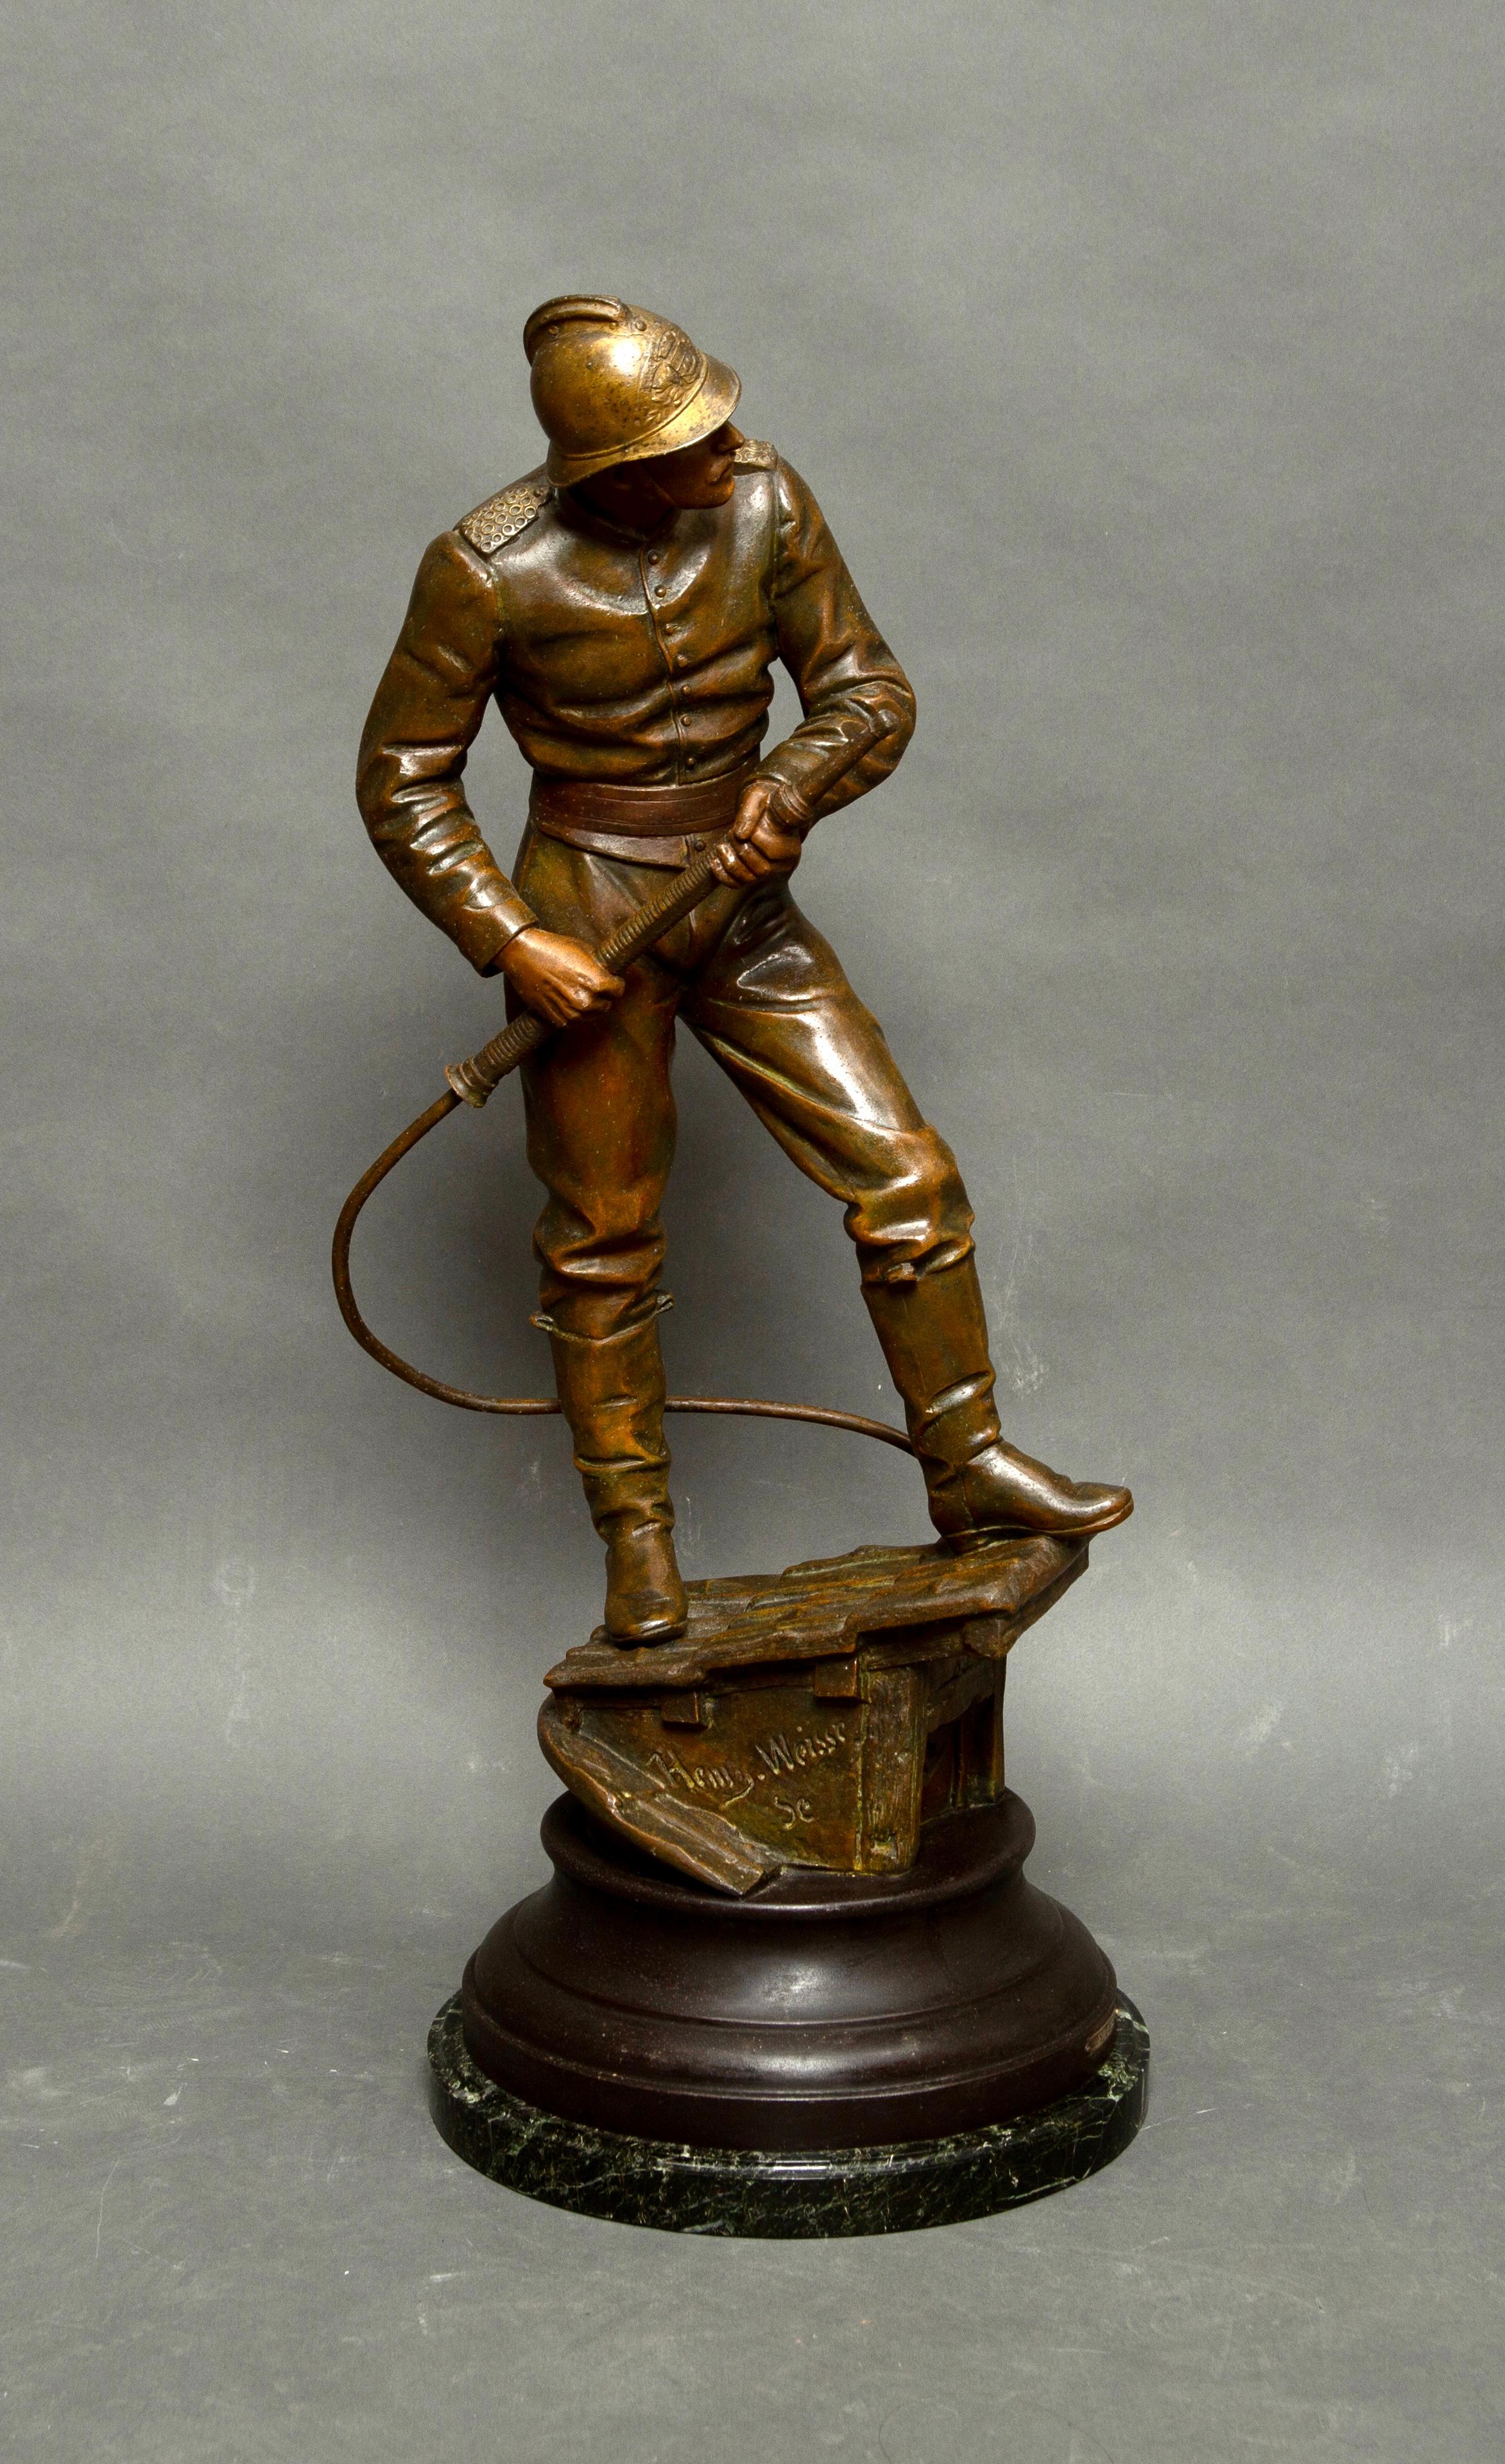 Large statue in regule metal representing a fireman of the city of Paris, under the Third Republic, in full action. The fireman, with a lance in his hand, is stationed on a roof, more precisely on a roof window, trying to put out a fire.
Medal